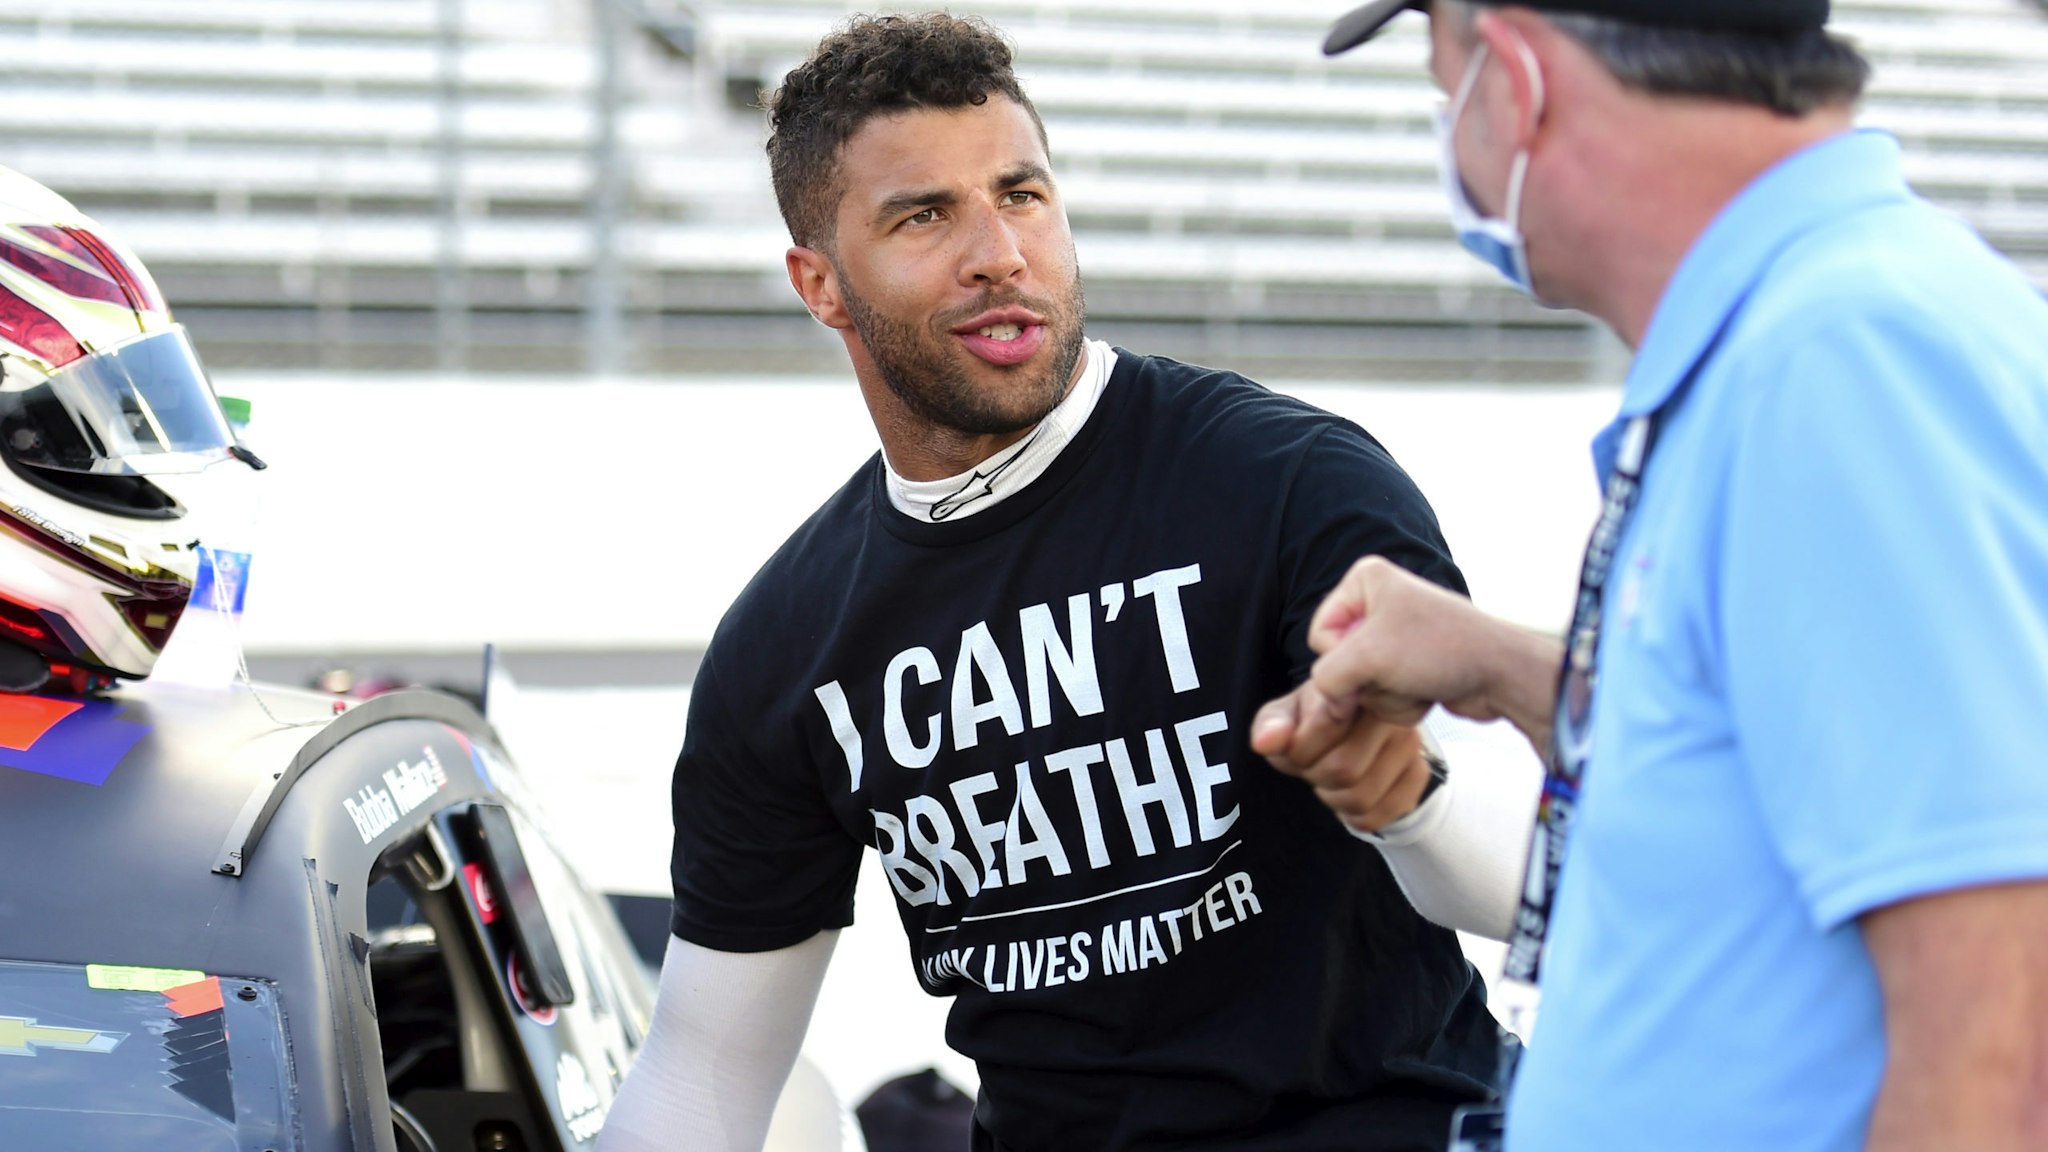 MARTINSVILLE, VIRGINIA - JUNE 10: Bubba Wallace, driver of the #43 Richard Petty Motorsports Chevrolet, wears a "I Can't Breathe - Black Lives Matter" t-shirt under his fire suit in solidarity with protesters around the world taking to the streets after the death of George Floyd on May 25, and crew bump fist prior to the NASCAR Cup Series Blue-Emu Maximum Pain Relief 500 at Martinsville Speedway on June 10, 2020 in Martinsville, Virginia.